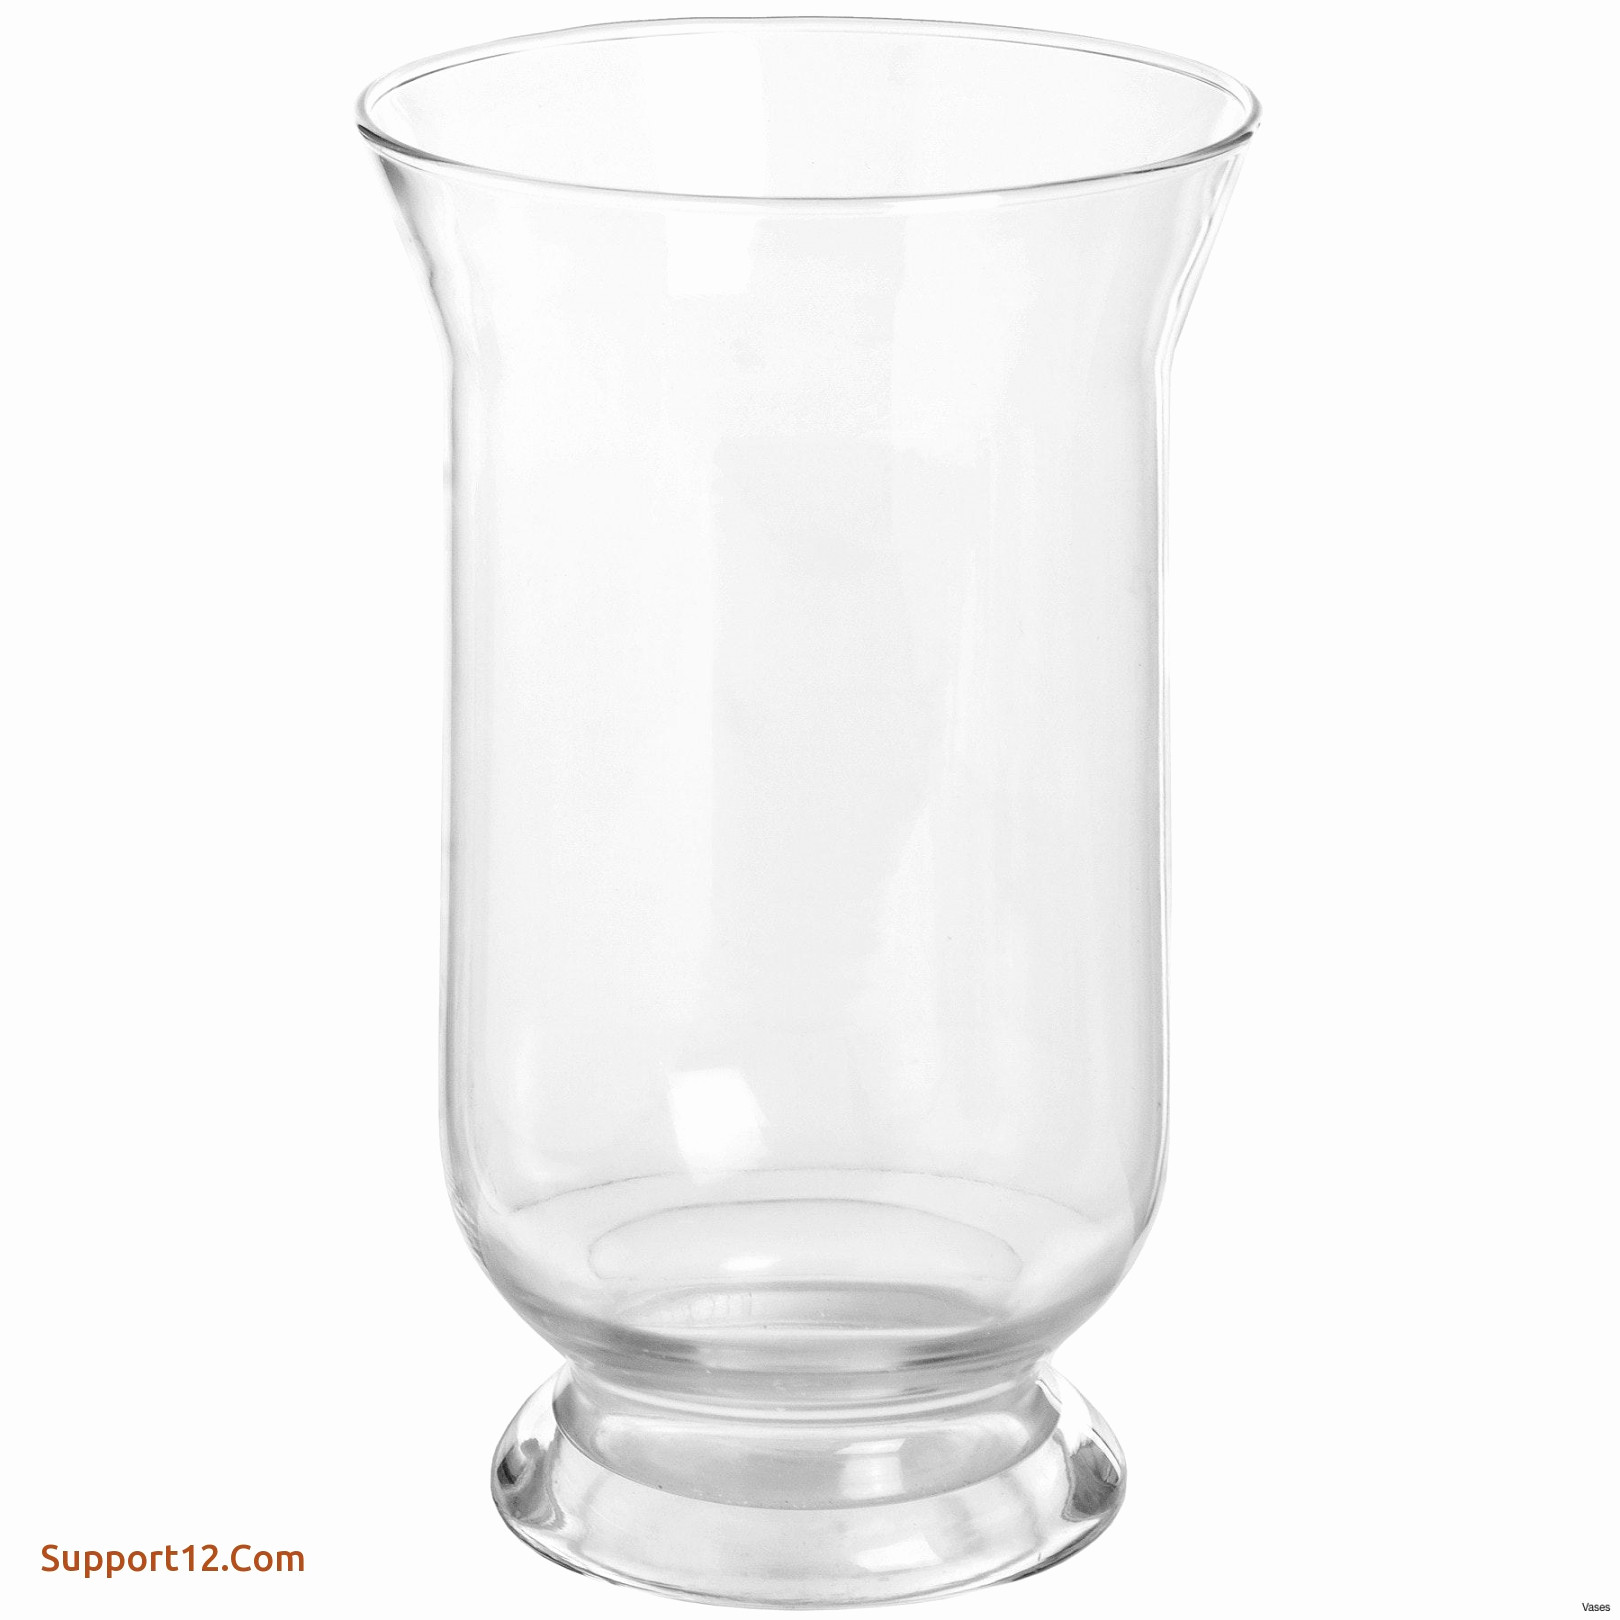 19 Ideal 24 Inch Tall Glass Vases 2024 free download 24 inch tall glass vases of 50 fresh images of square glass vases bulk kendallquack com for square glass vases bulk best of lovely tall pedestal cylinder glass vase support12 50 fresh images